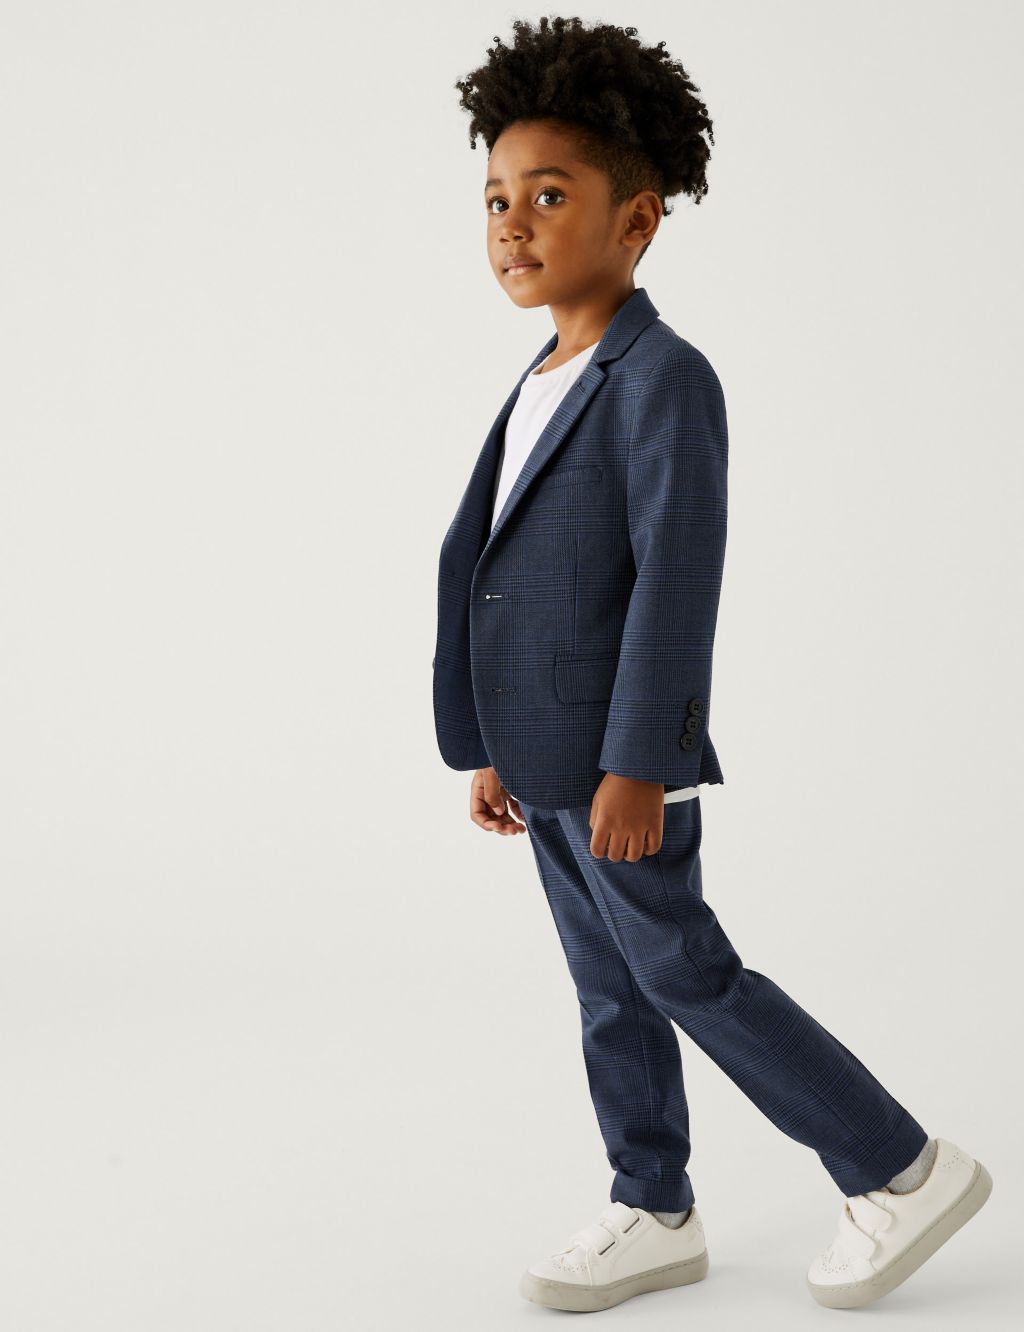 Younger Boys’ Outfits | M&S